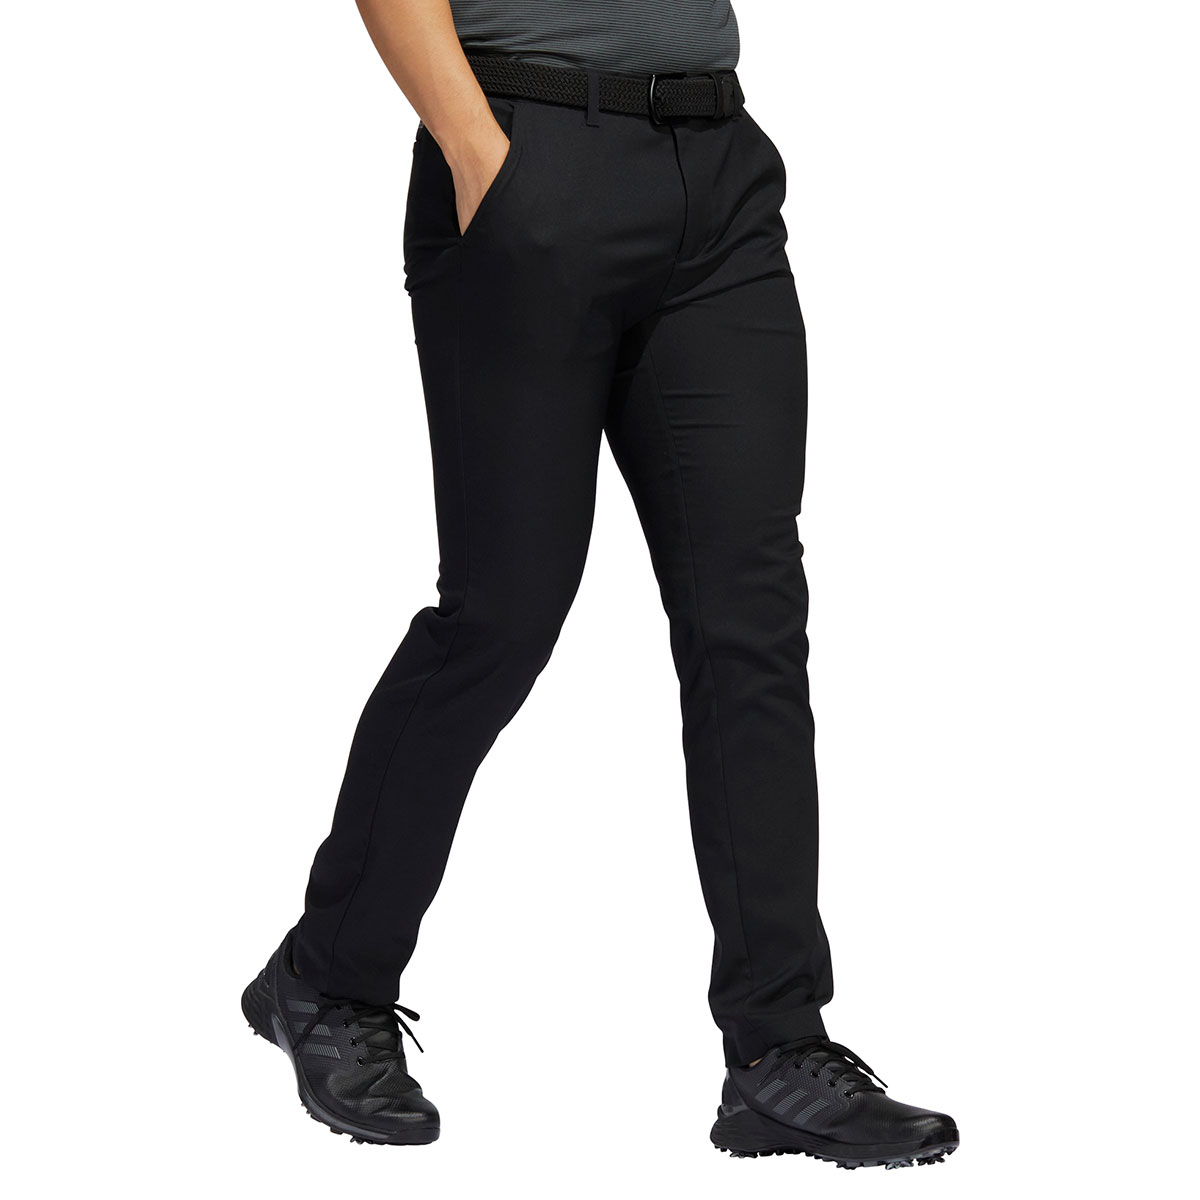 Buy Golf Trousers Pants for Men in Different Colors. Online in India - Etsy